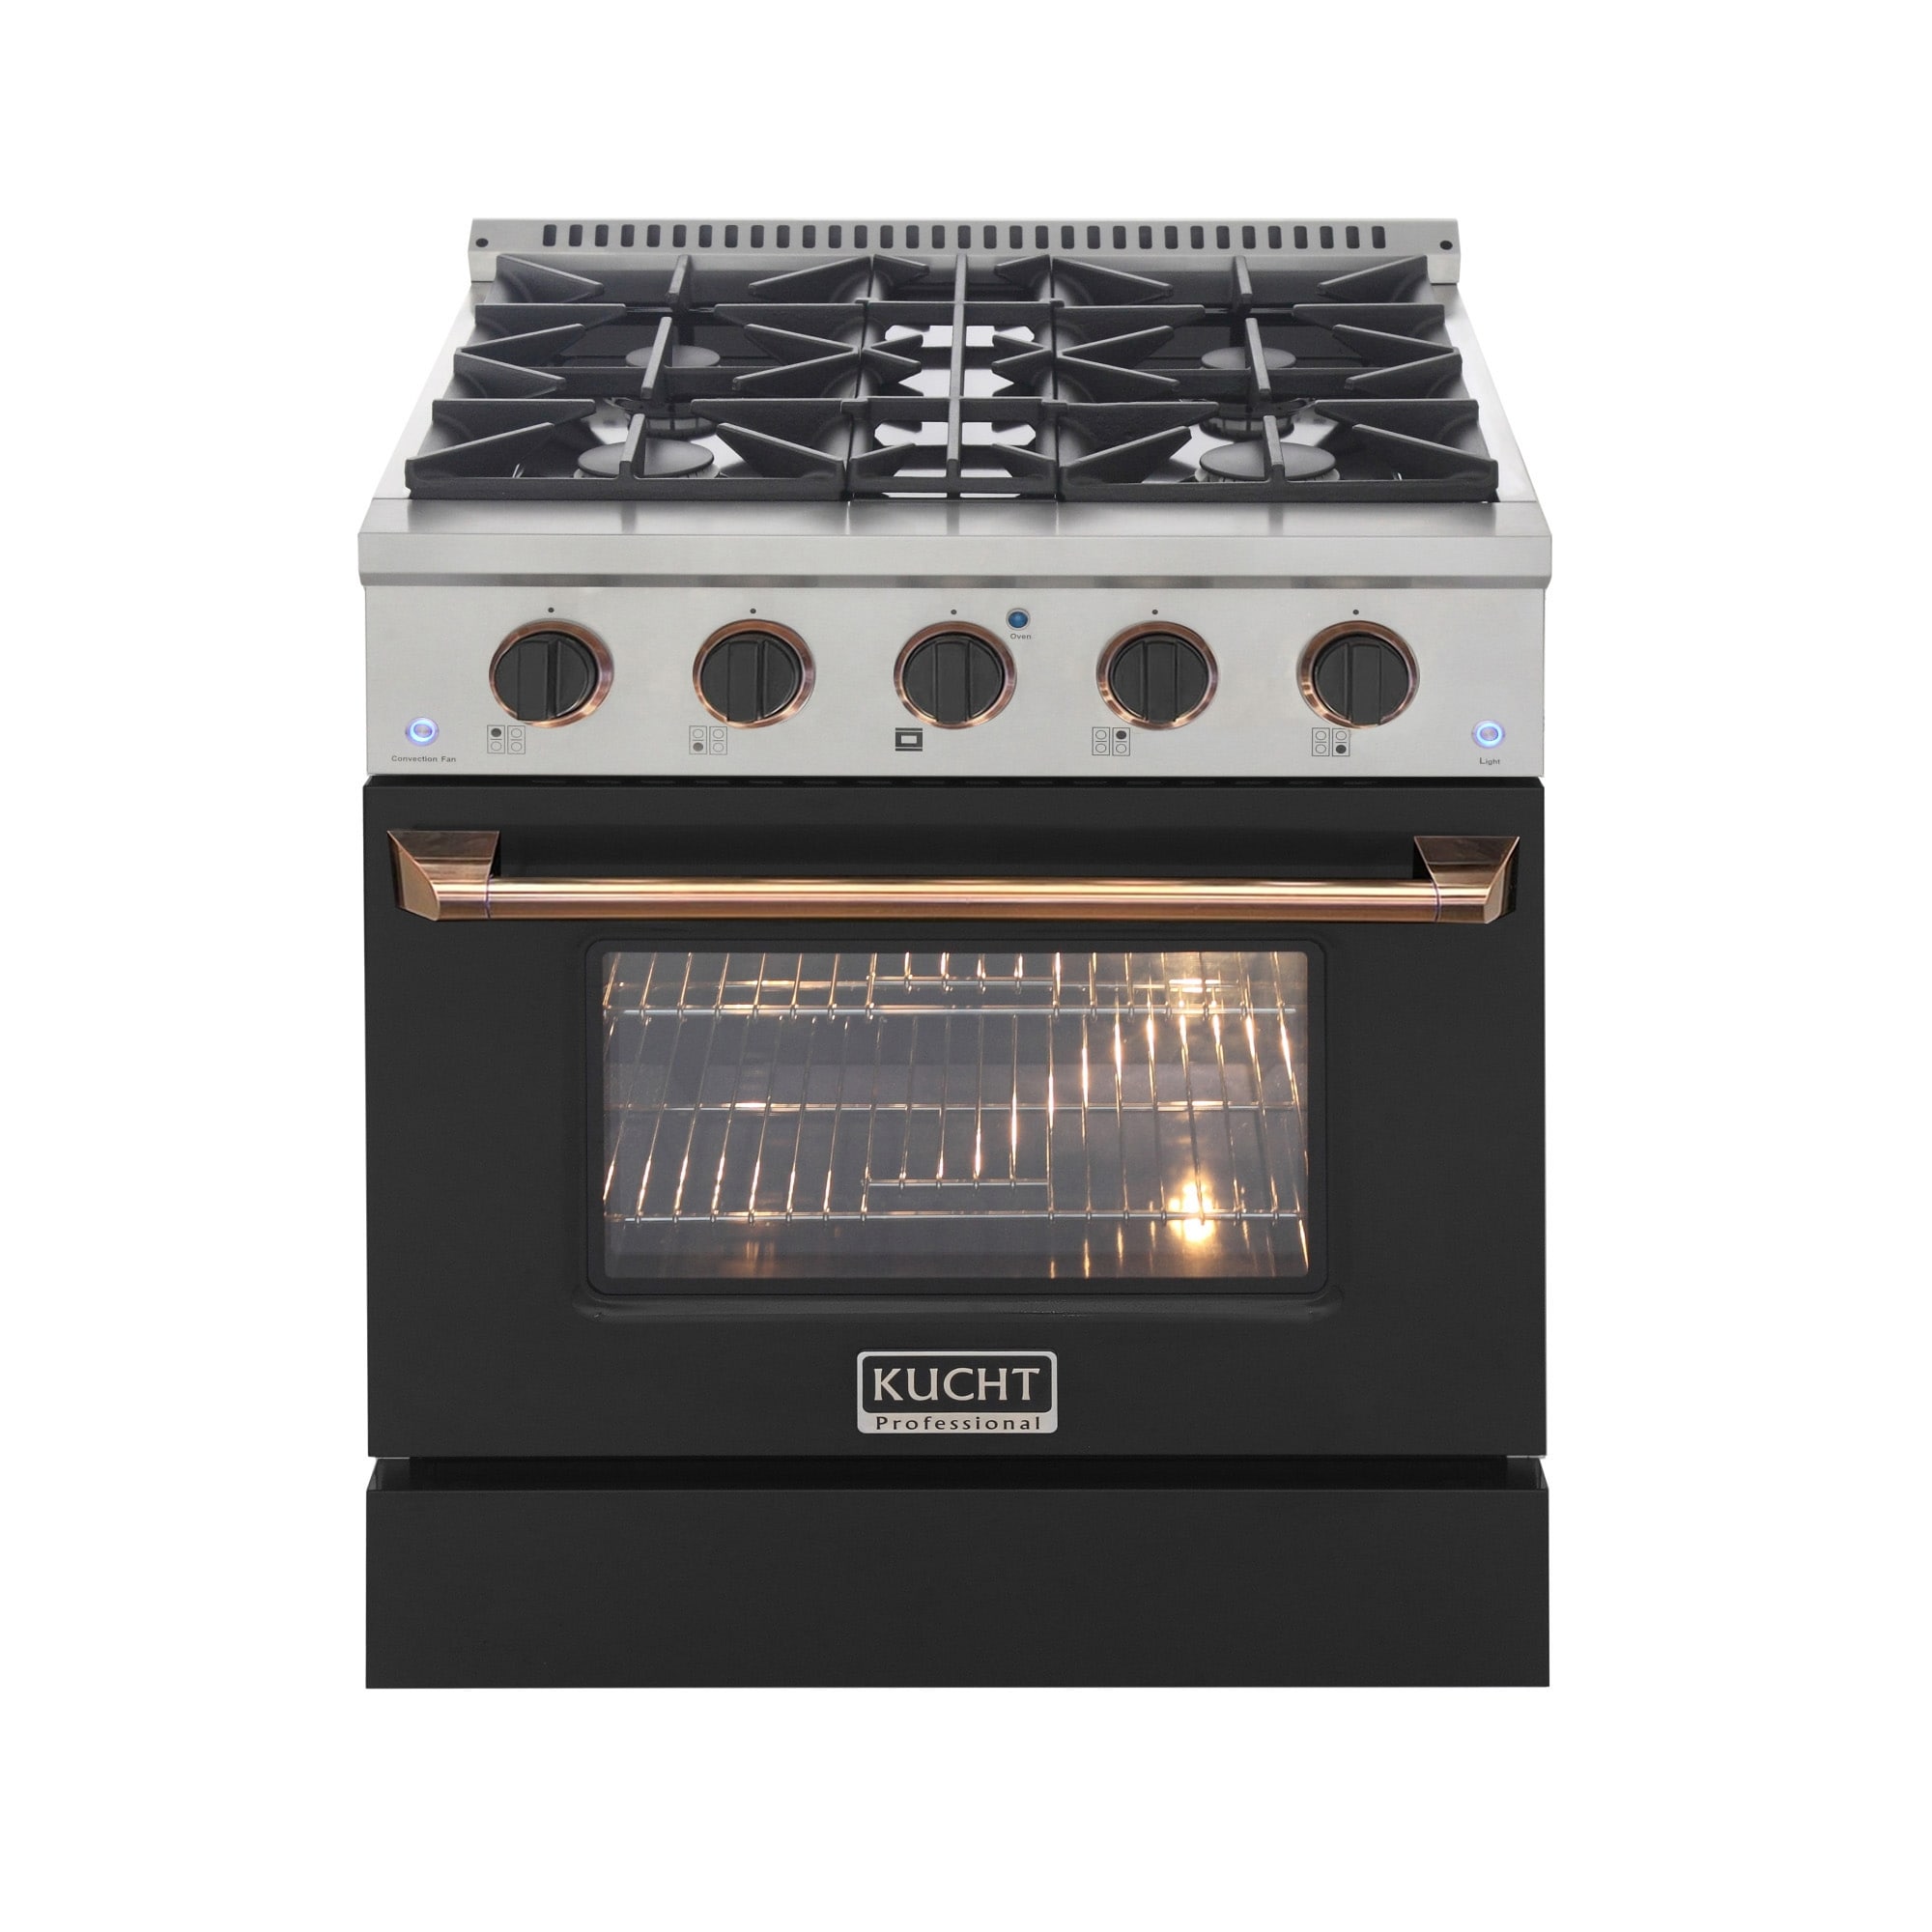 KUCHT Professional 30 in. 4.2 cu. ft. Natural Gas Range with Sealed Burners and Convection Oven in SS with customized colors